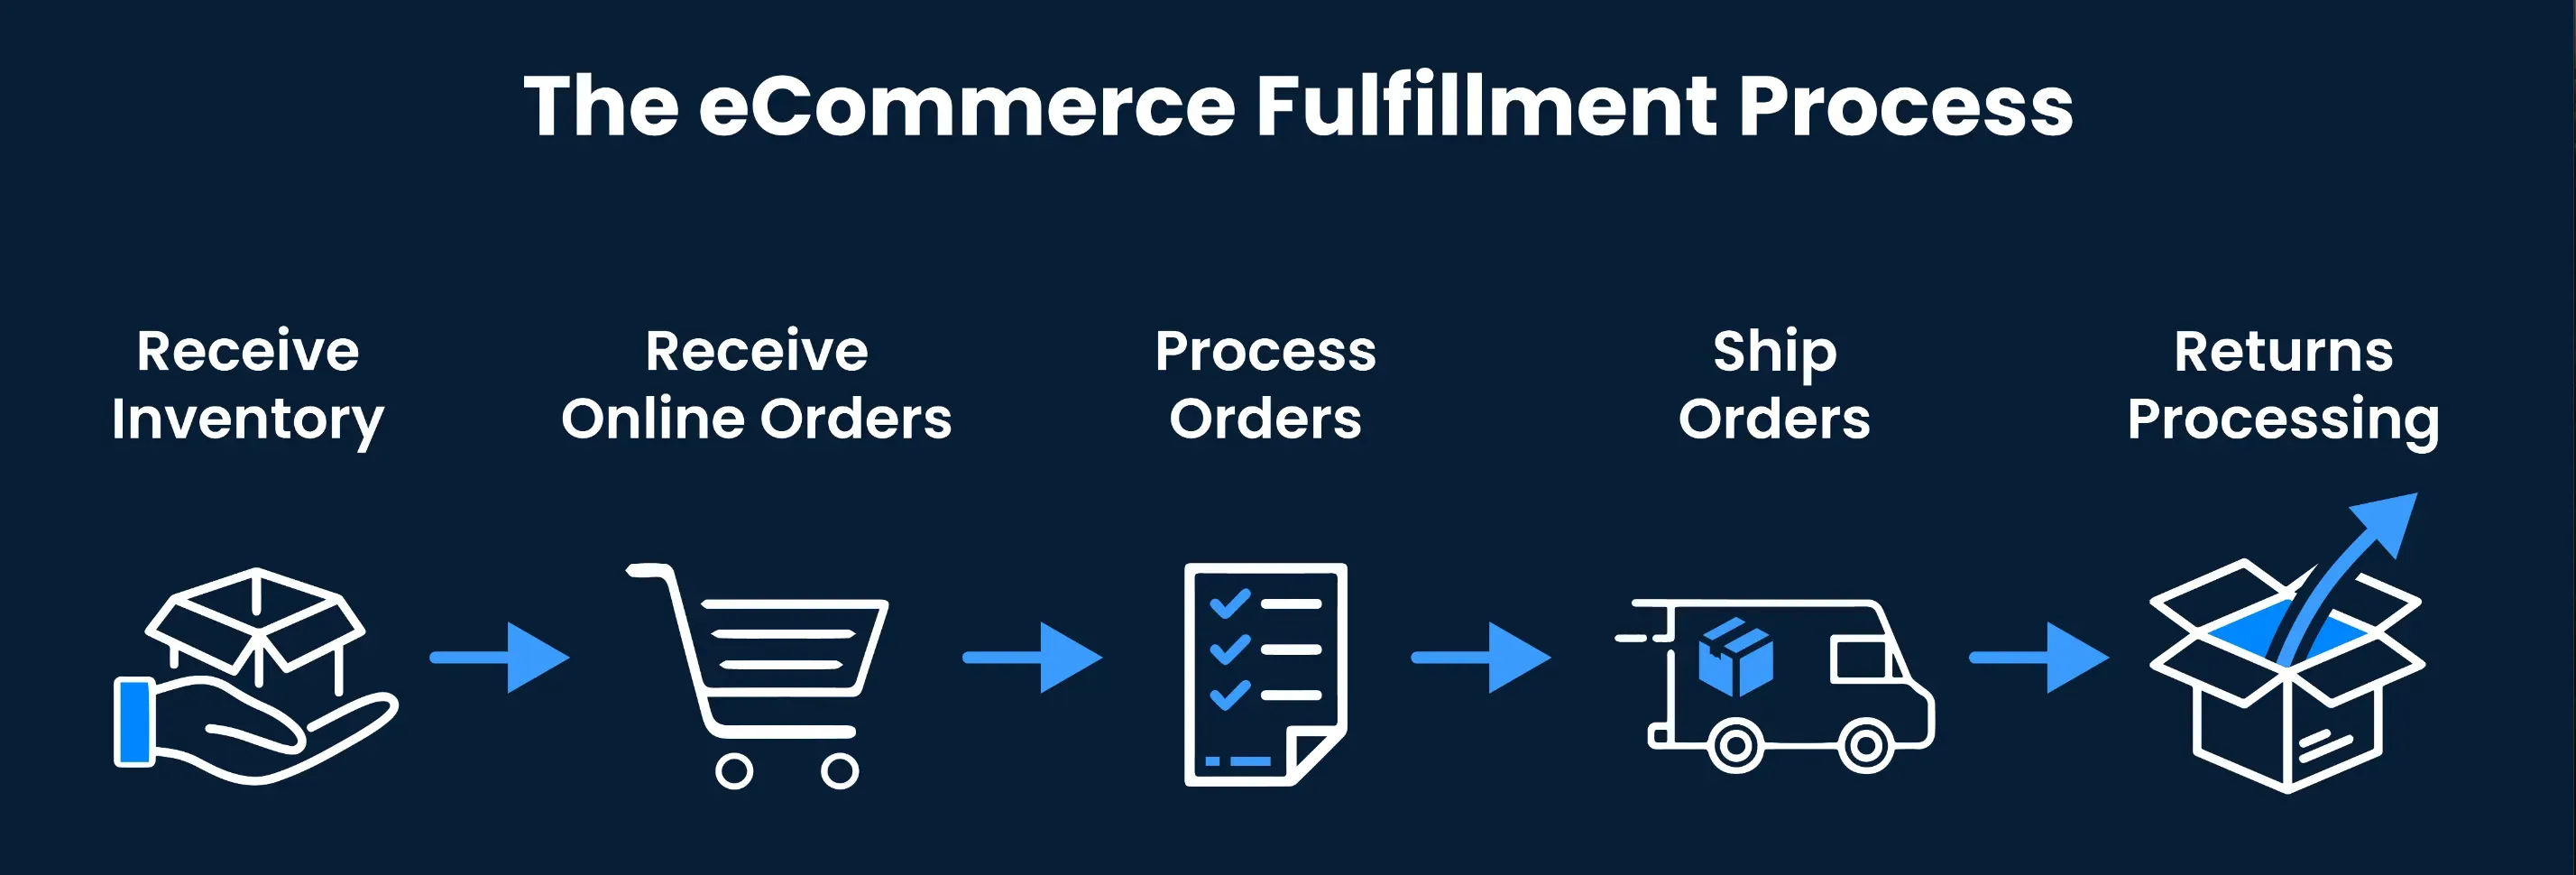 When Does Ecommerce Fulfillment Occur?